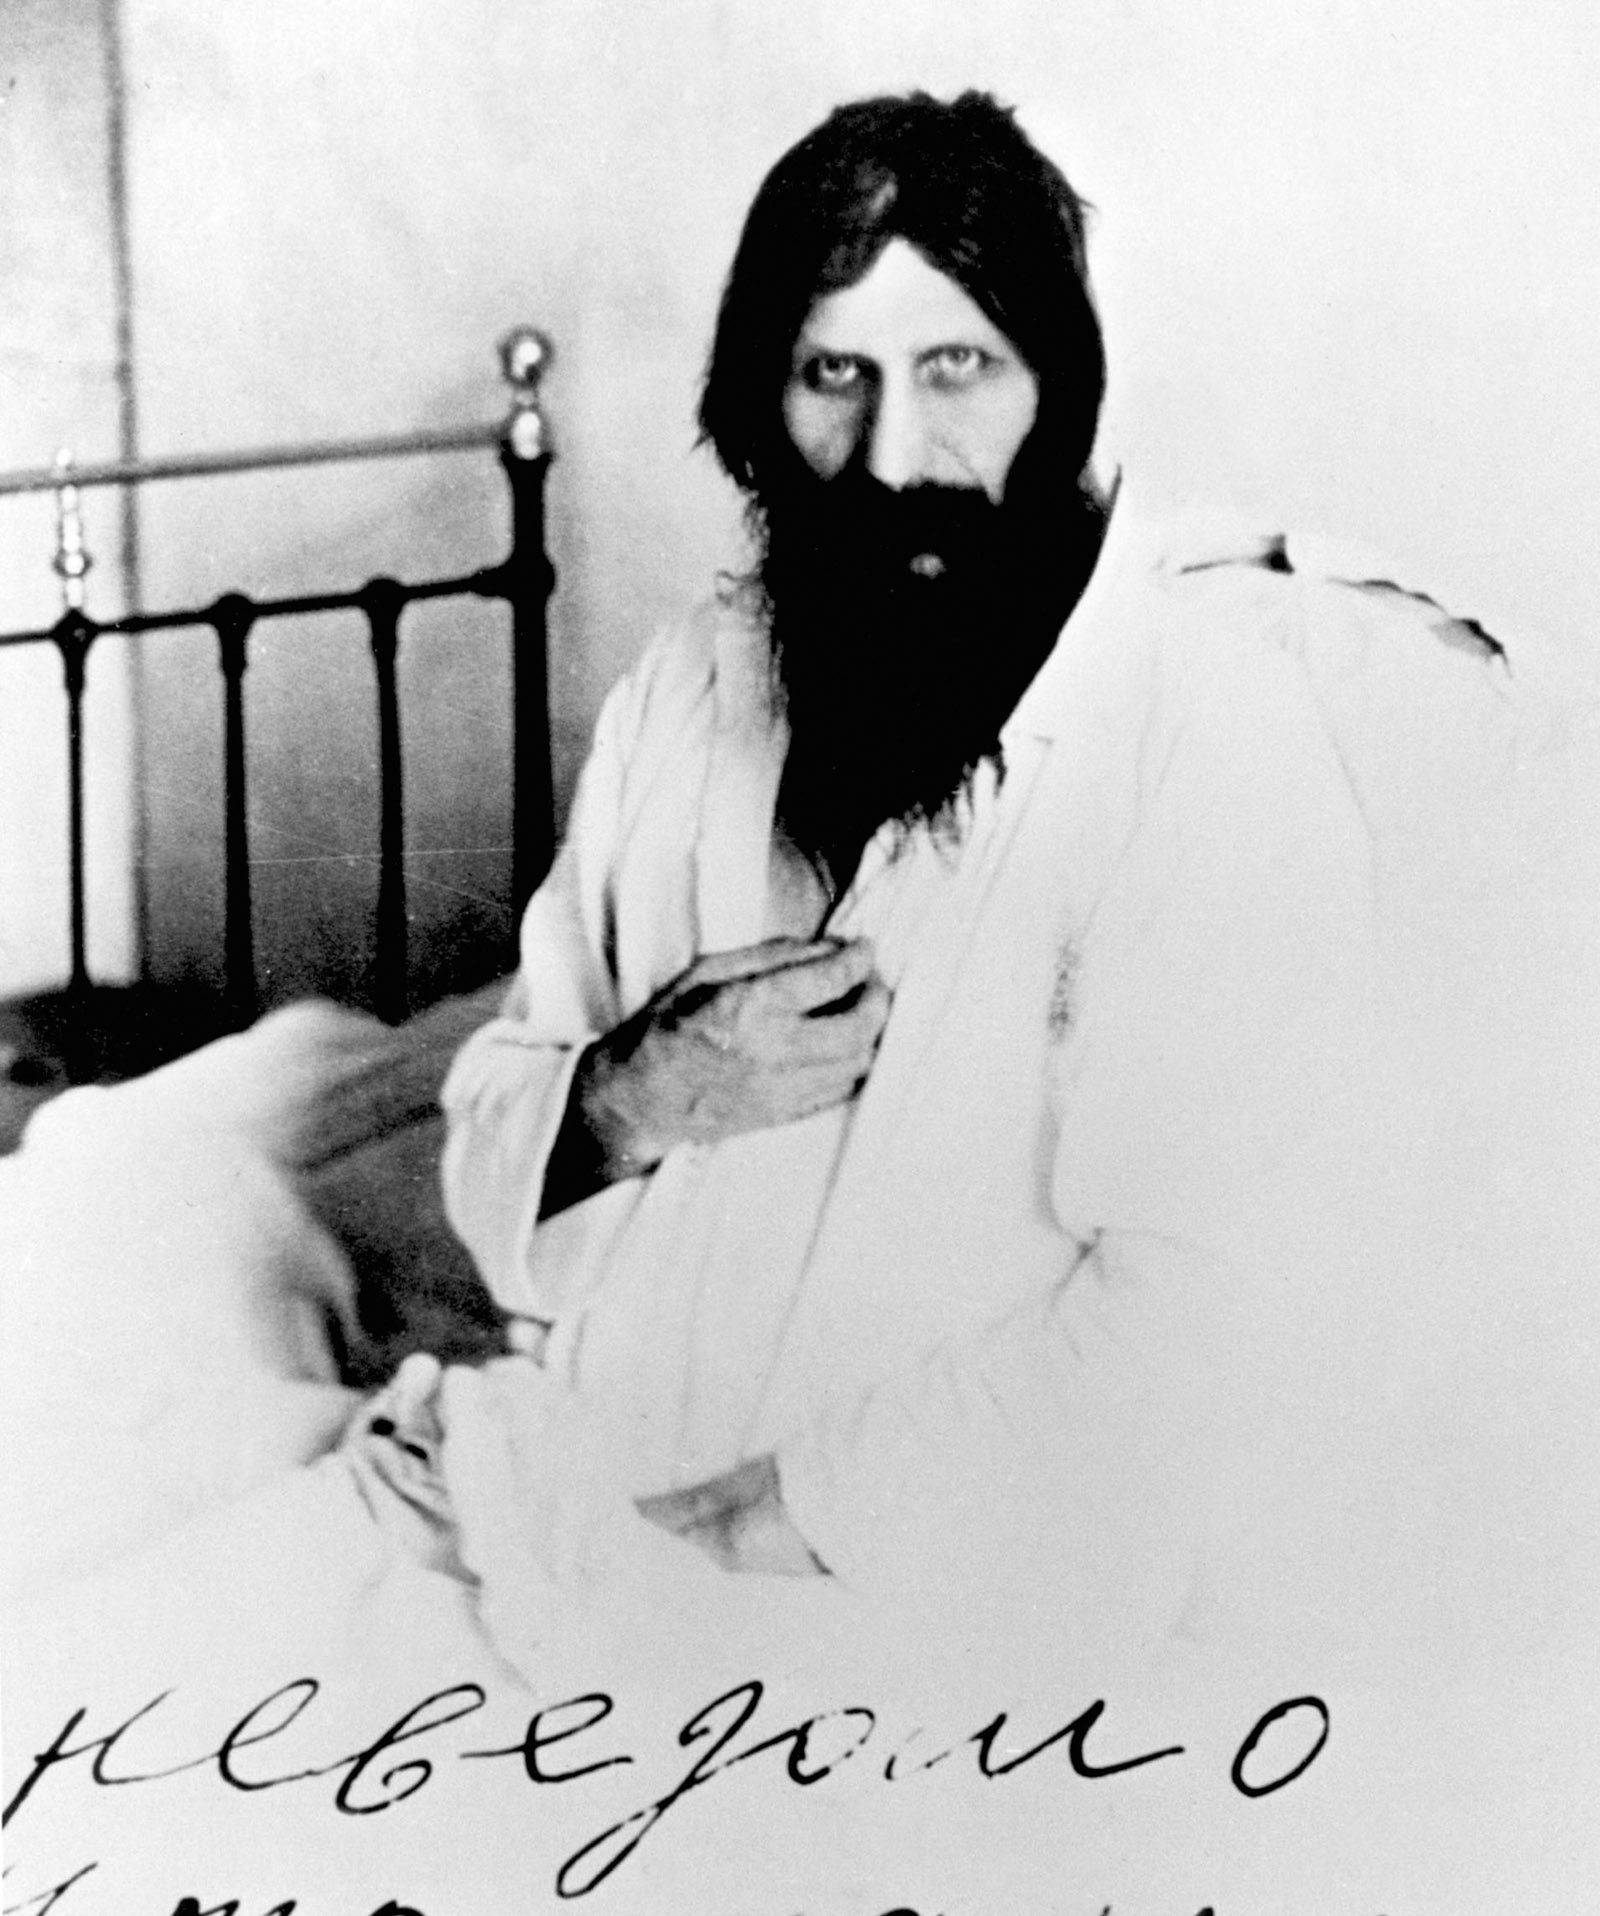 Gregory Rasputin in the hospital after being stabbed in an attempted assassination, Tyumen, Siberia, 1914. The writing at the bottom is a detail of Rasputin’s inscription, which Douglas Smith translates as follows: ‘God knows what is to become of us in the morn.’